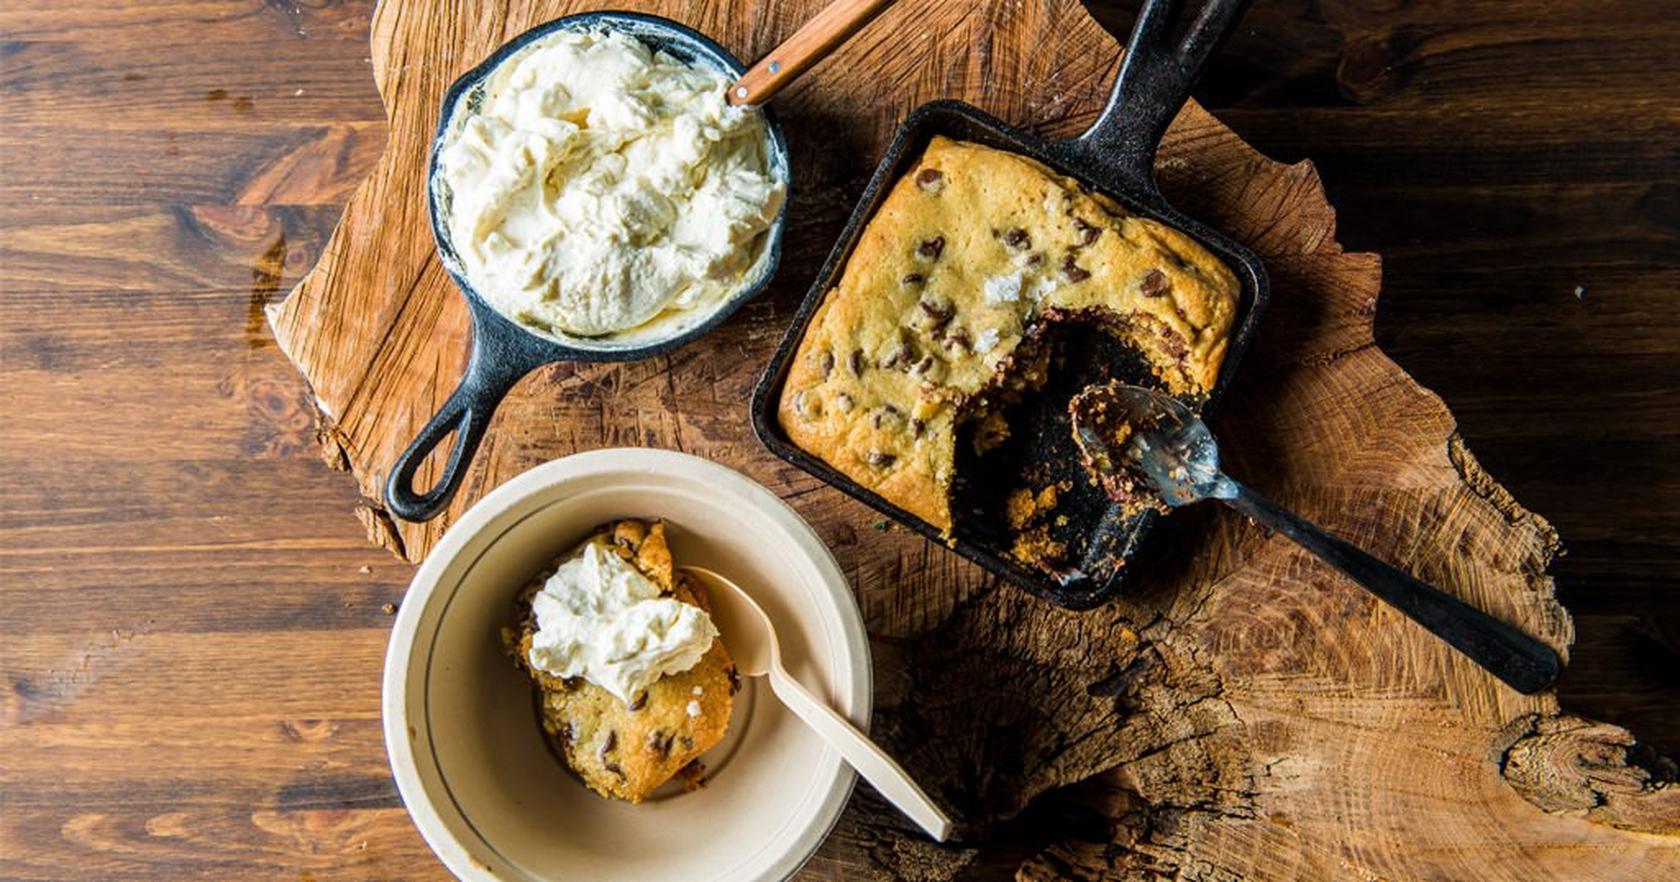 Baked Cast-Iron Cookie with Smoked Bourbon Whip by Chef Timothy Hollingsworth